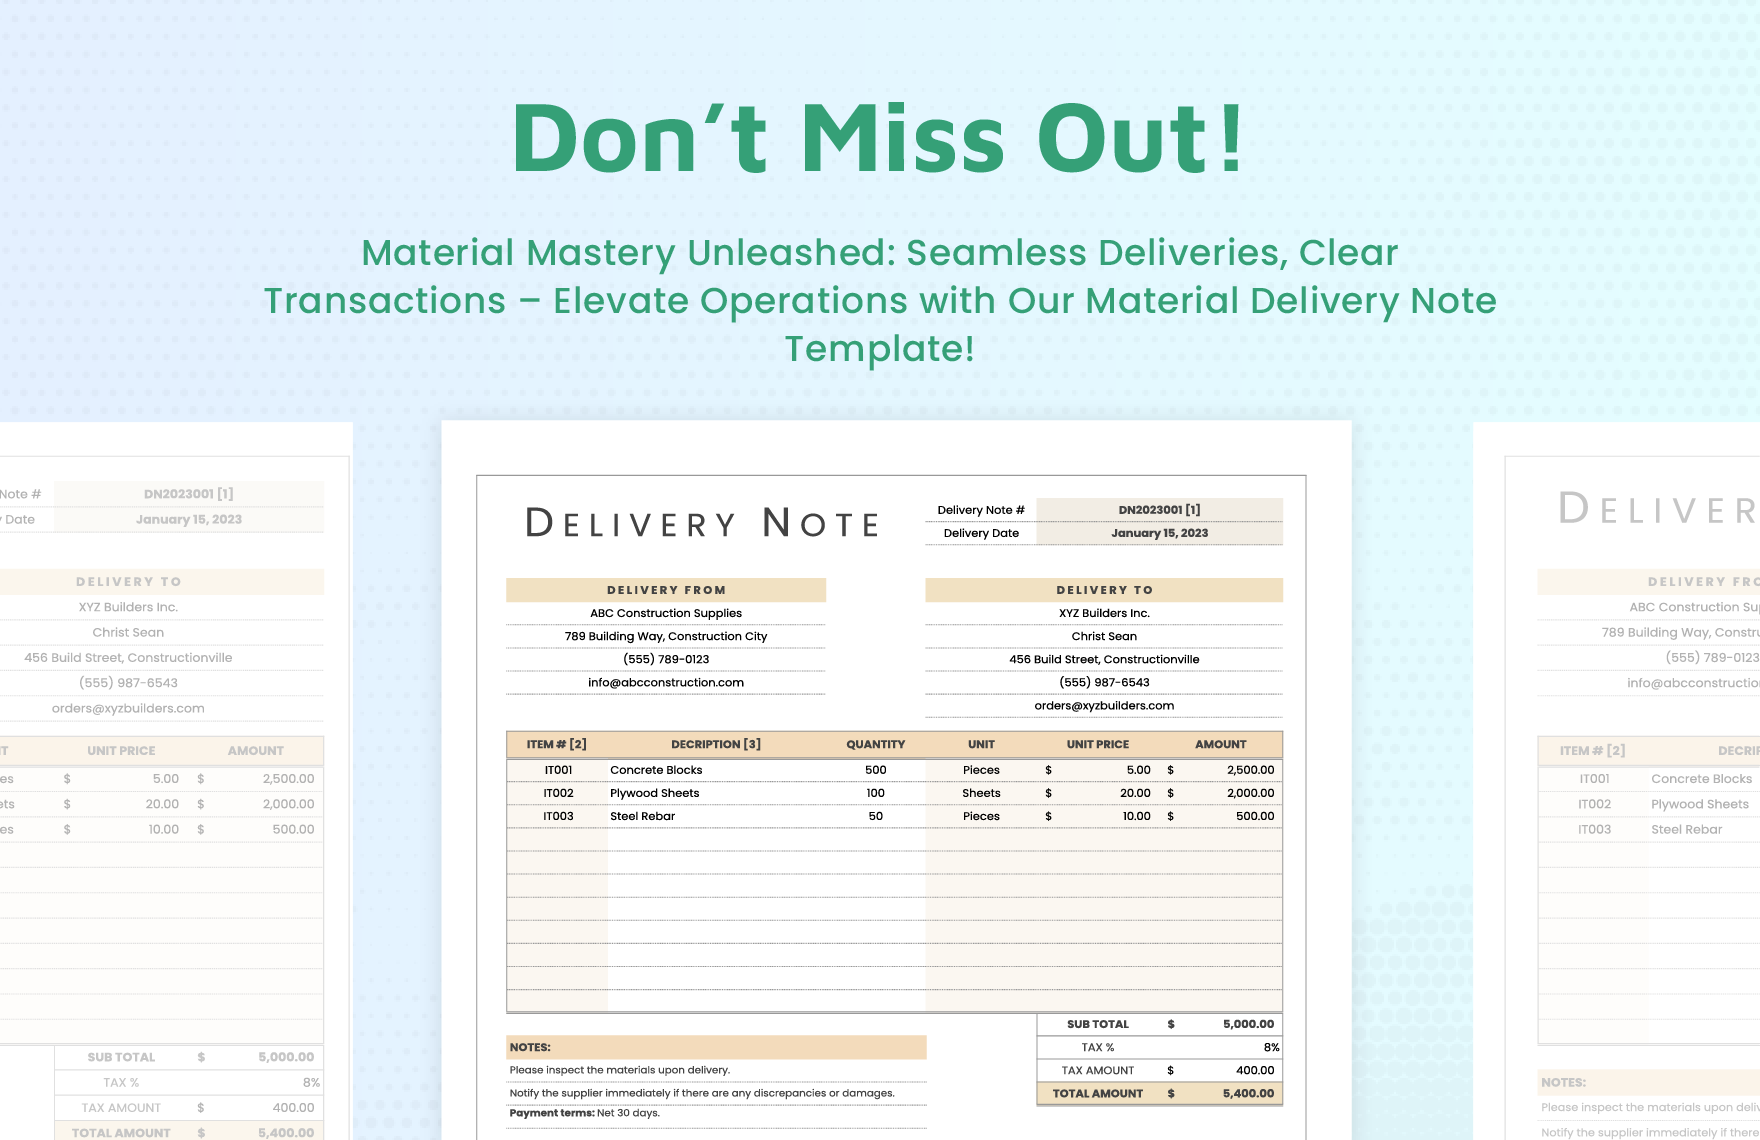 Material Delivery Note Template